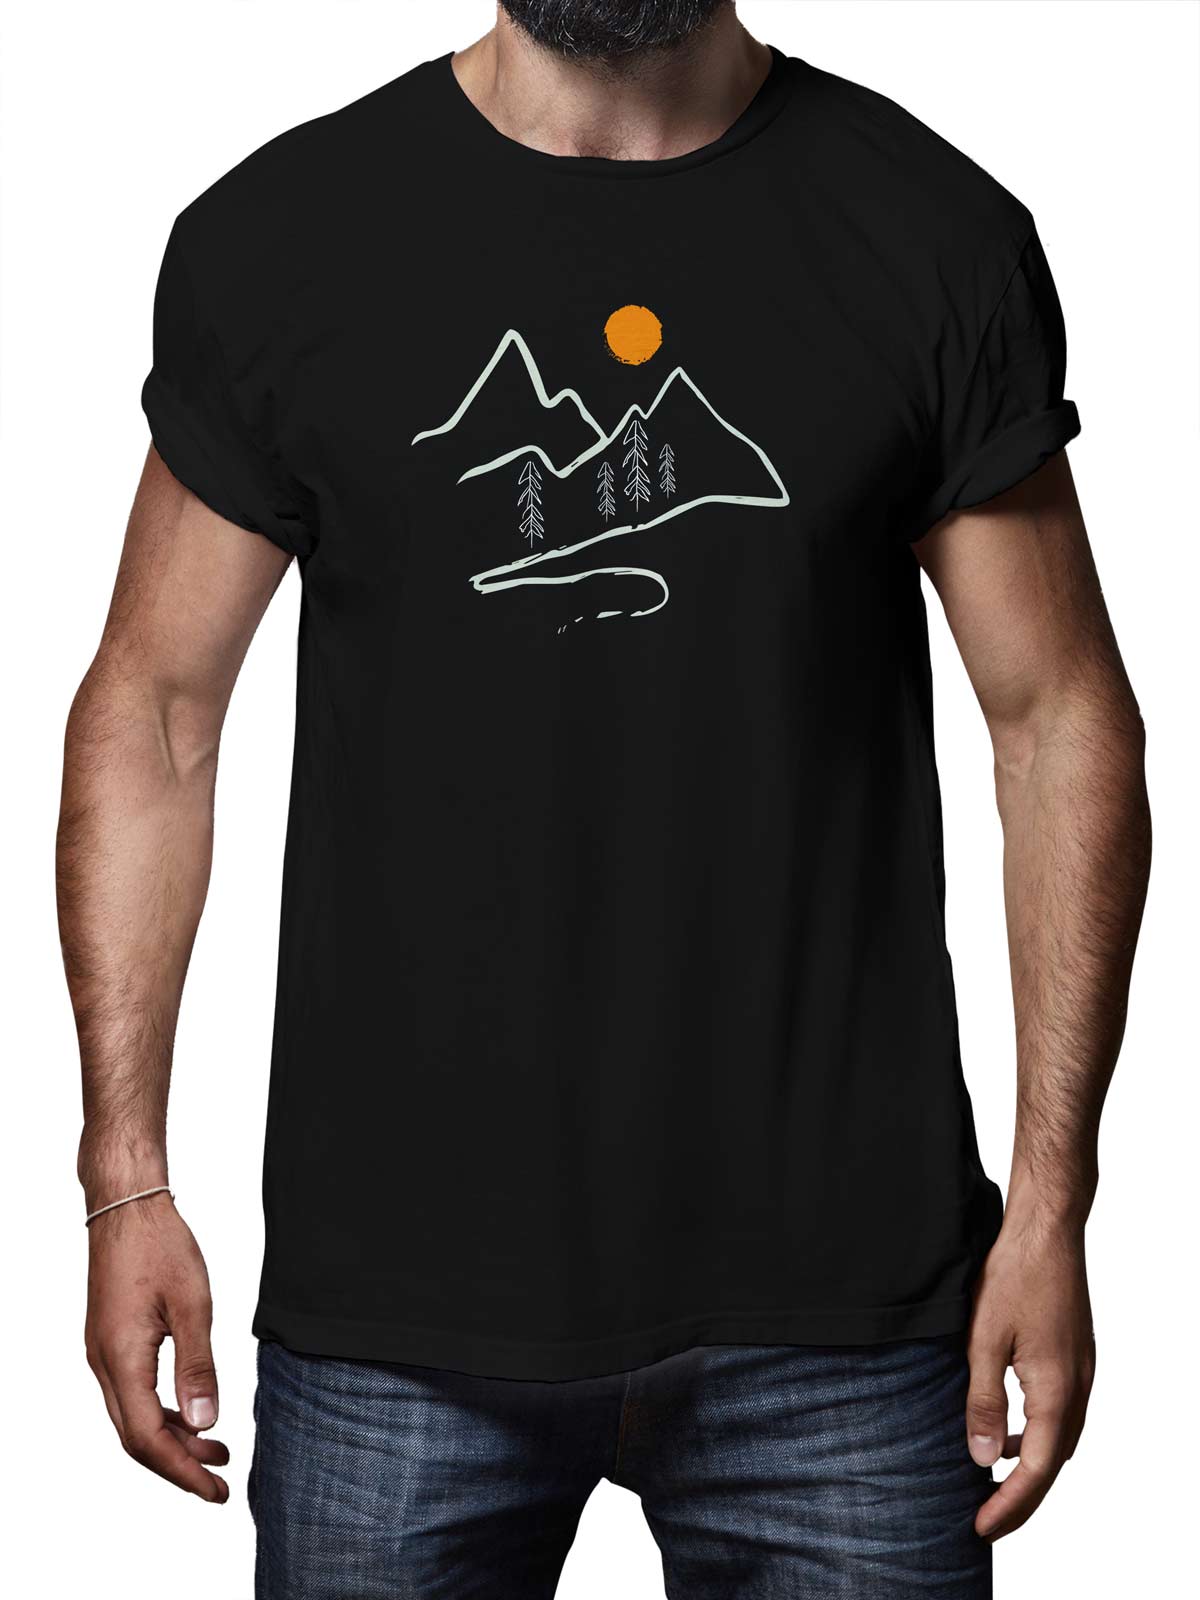 Mountain-road-printed-t-shirt-for-men by Ghumakkad